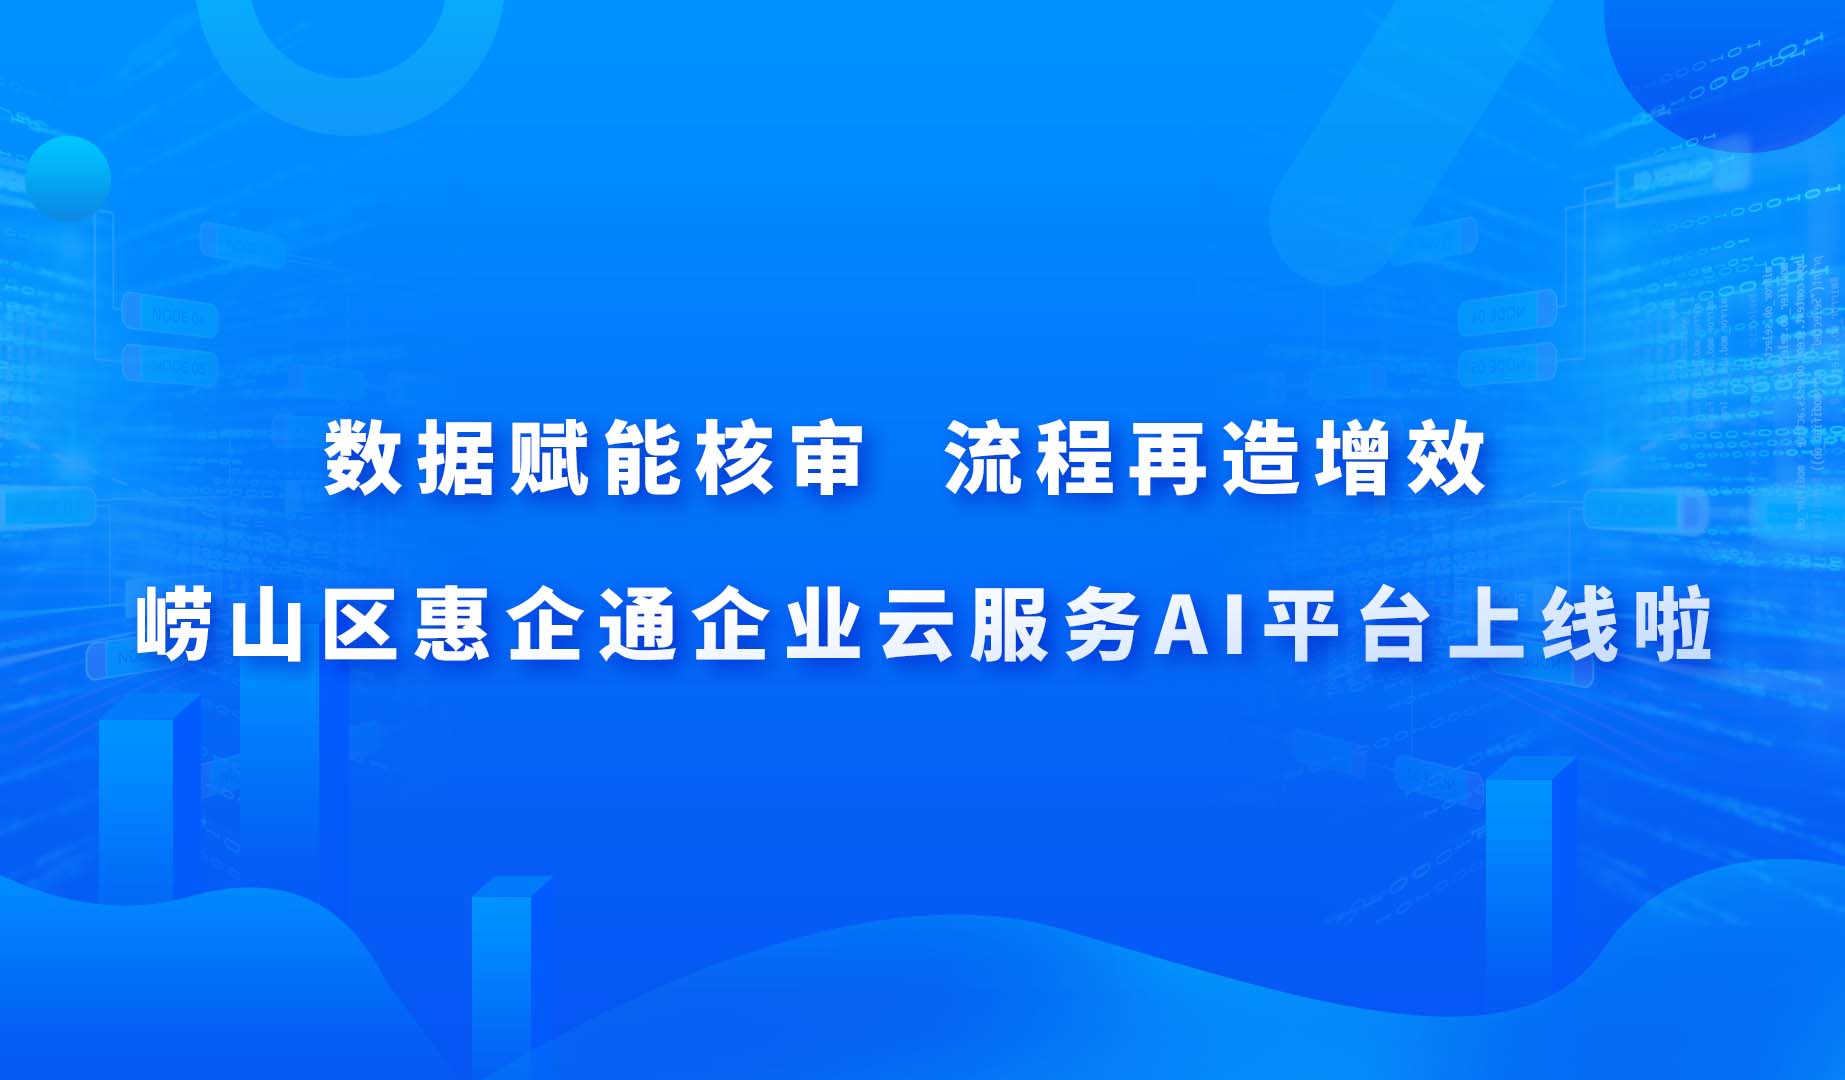 The AI platform of Huiqitong Enterprise Cloud Service in Laoshan District is online.